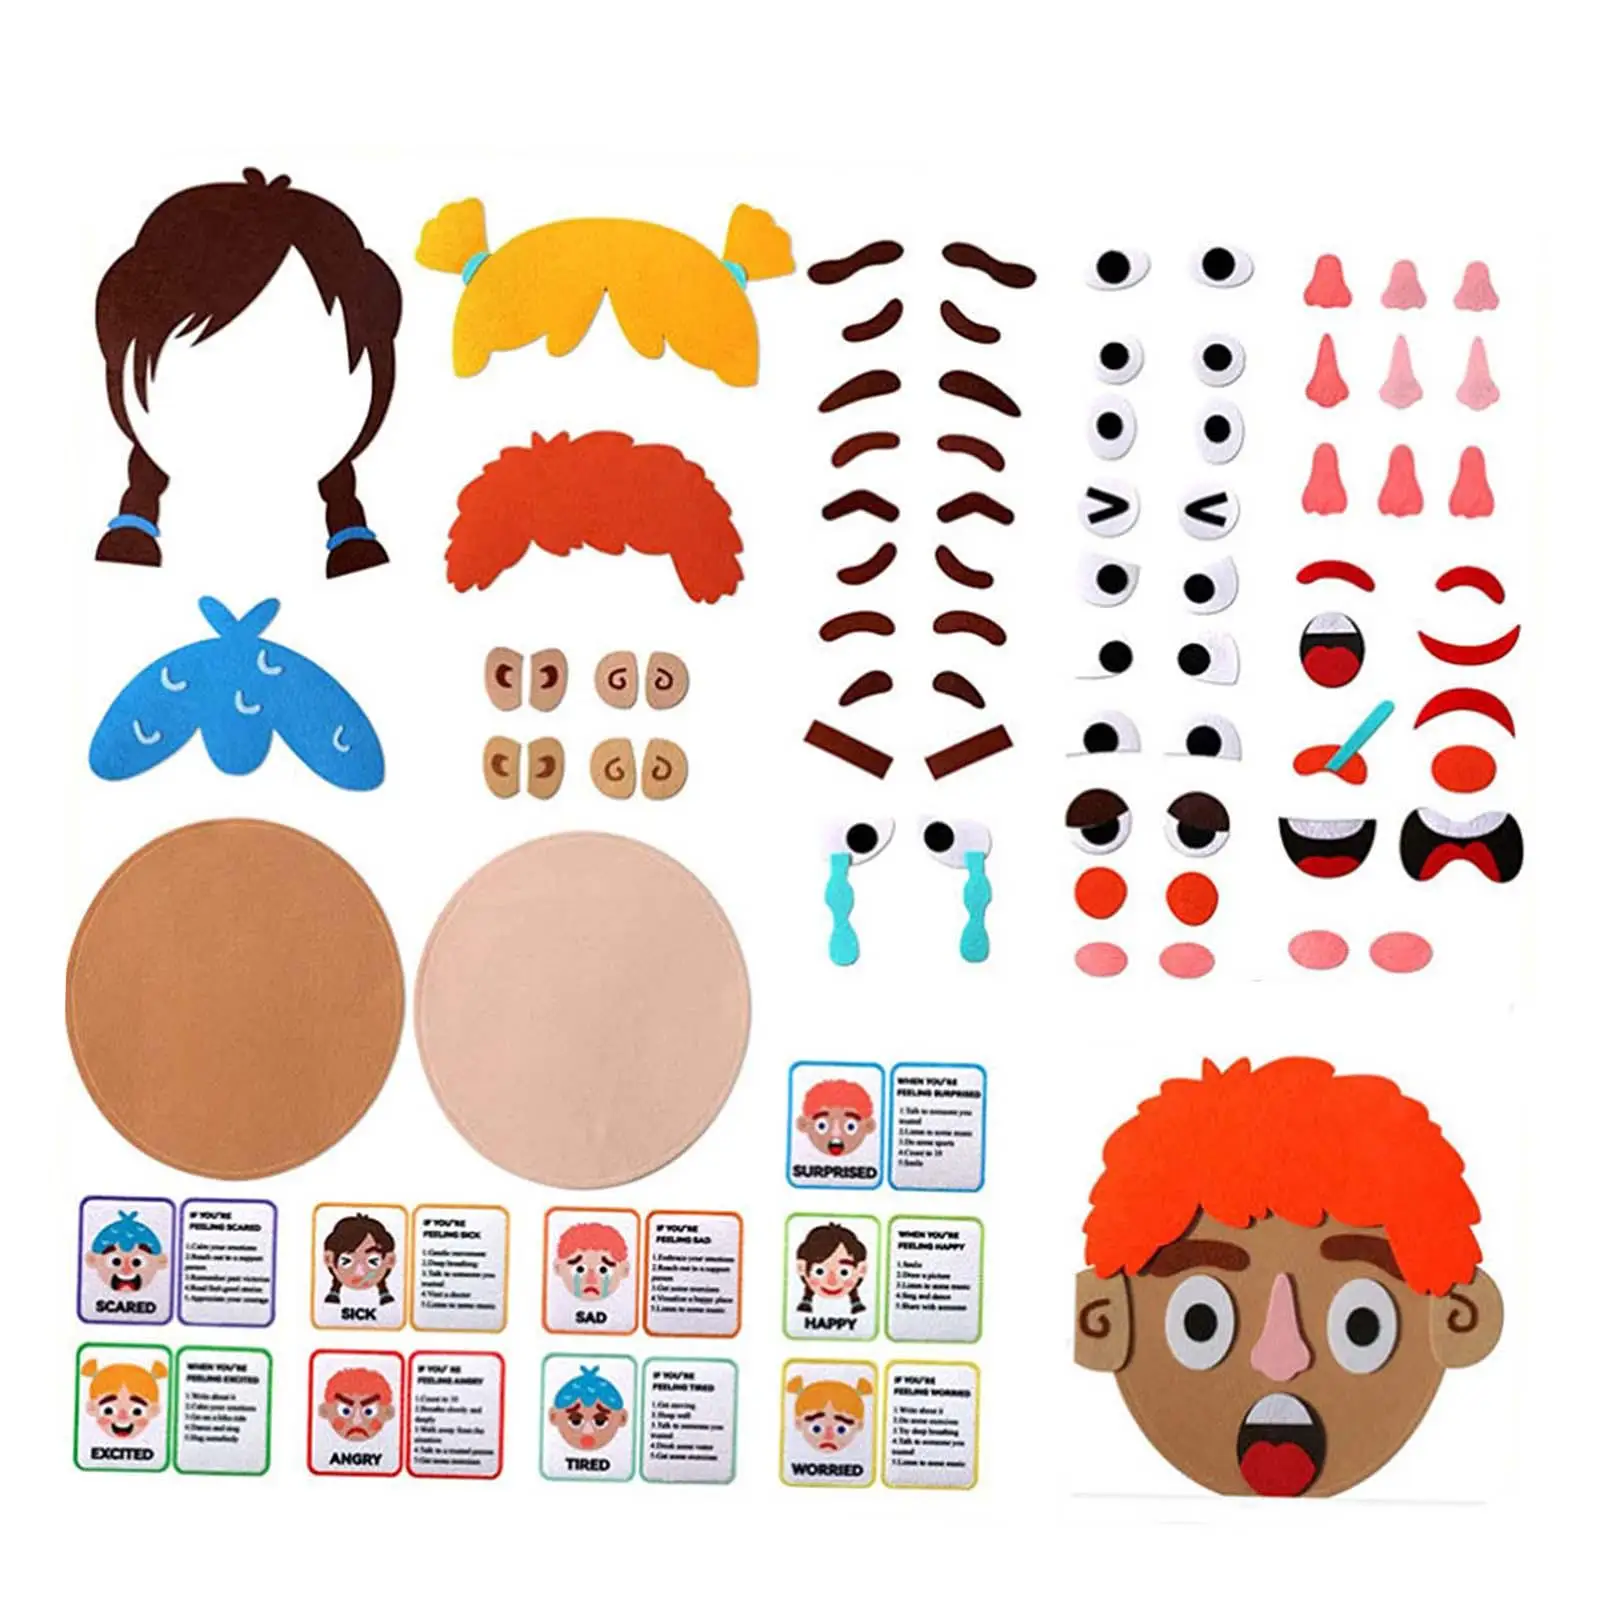 Social Emotional Learning Toy Activities Learning Preschool Make A Funny Faces Stickers Games Educational Toy for Toddlers Boys